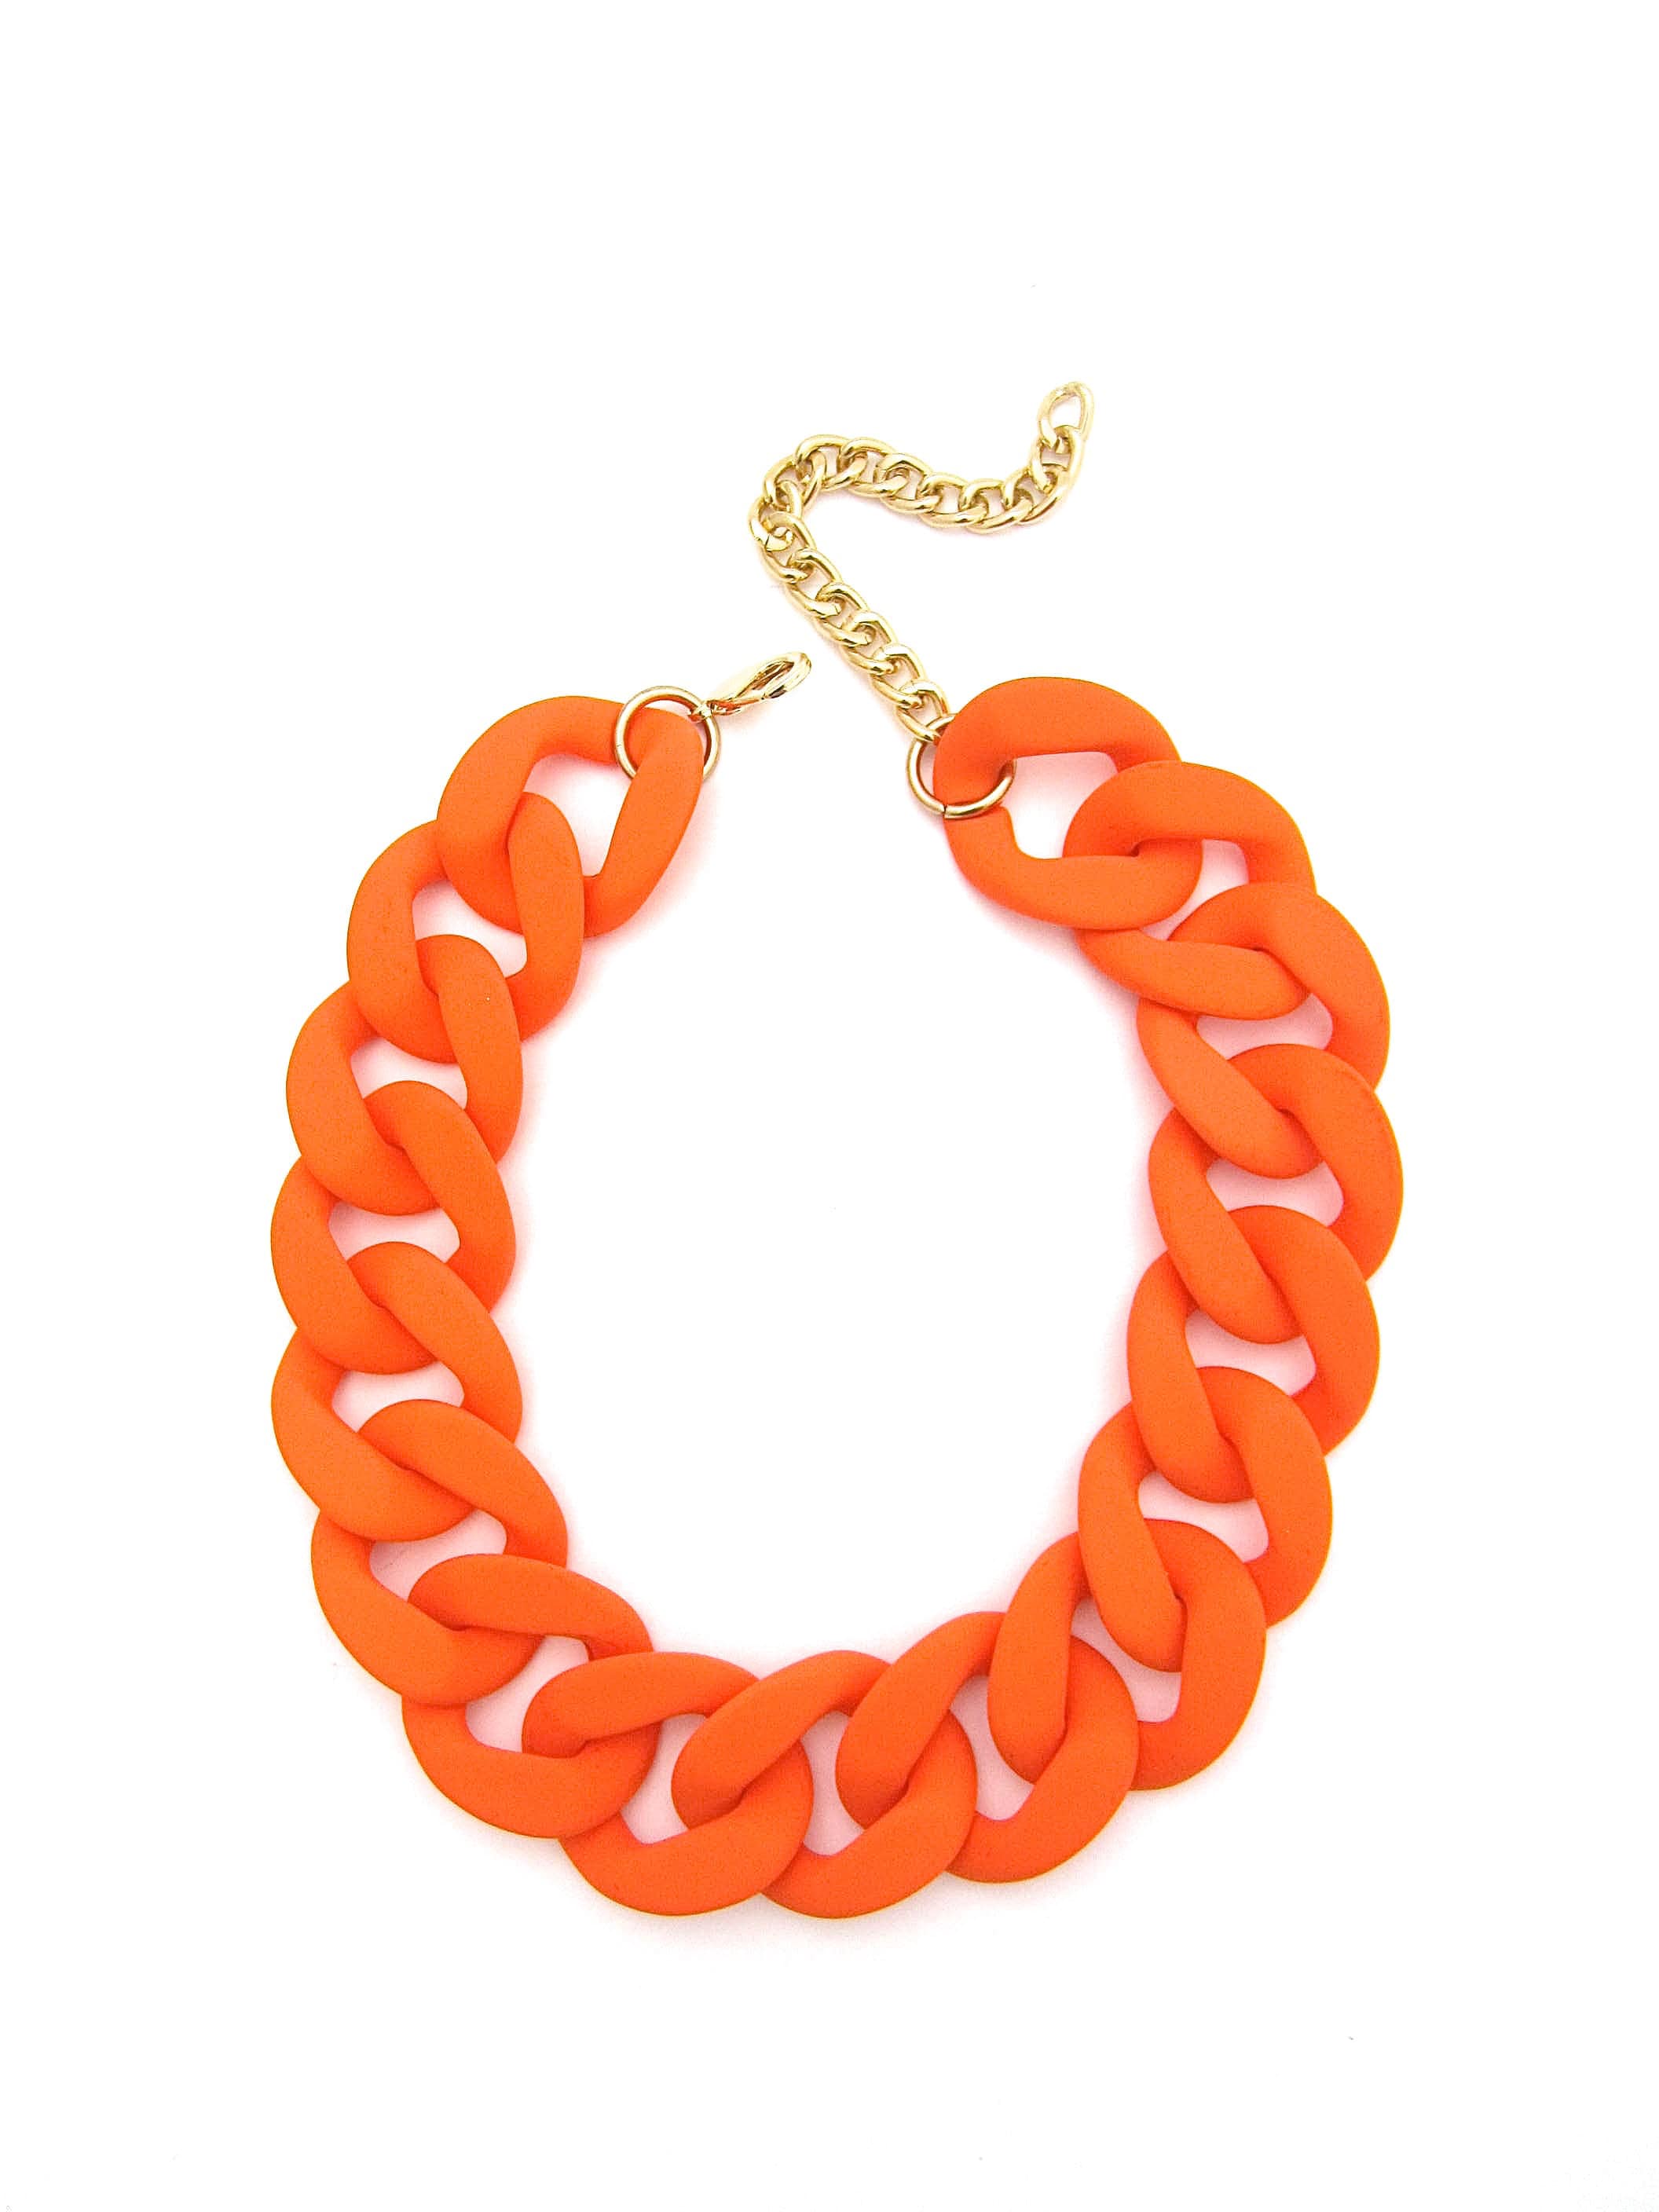 Chunky Orange Necklace, Bright Statement Chain, Large Matte Link Customized Jewelry, Acrylic Resin Chain